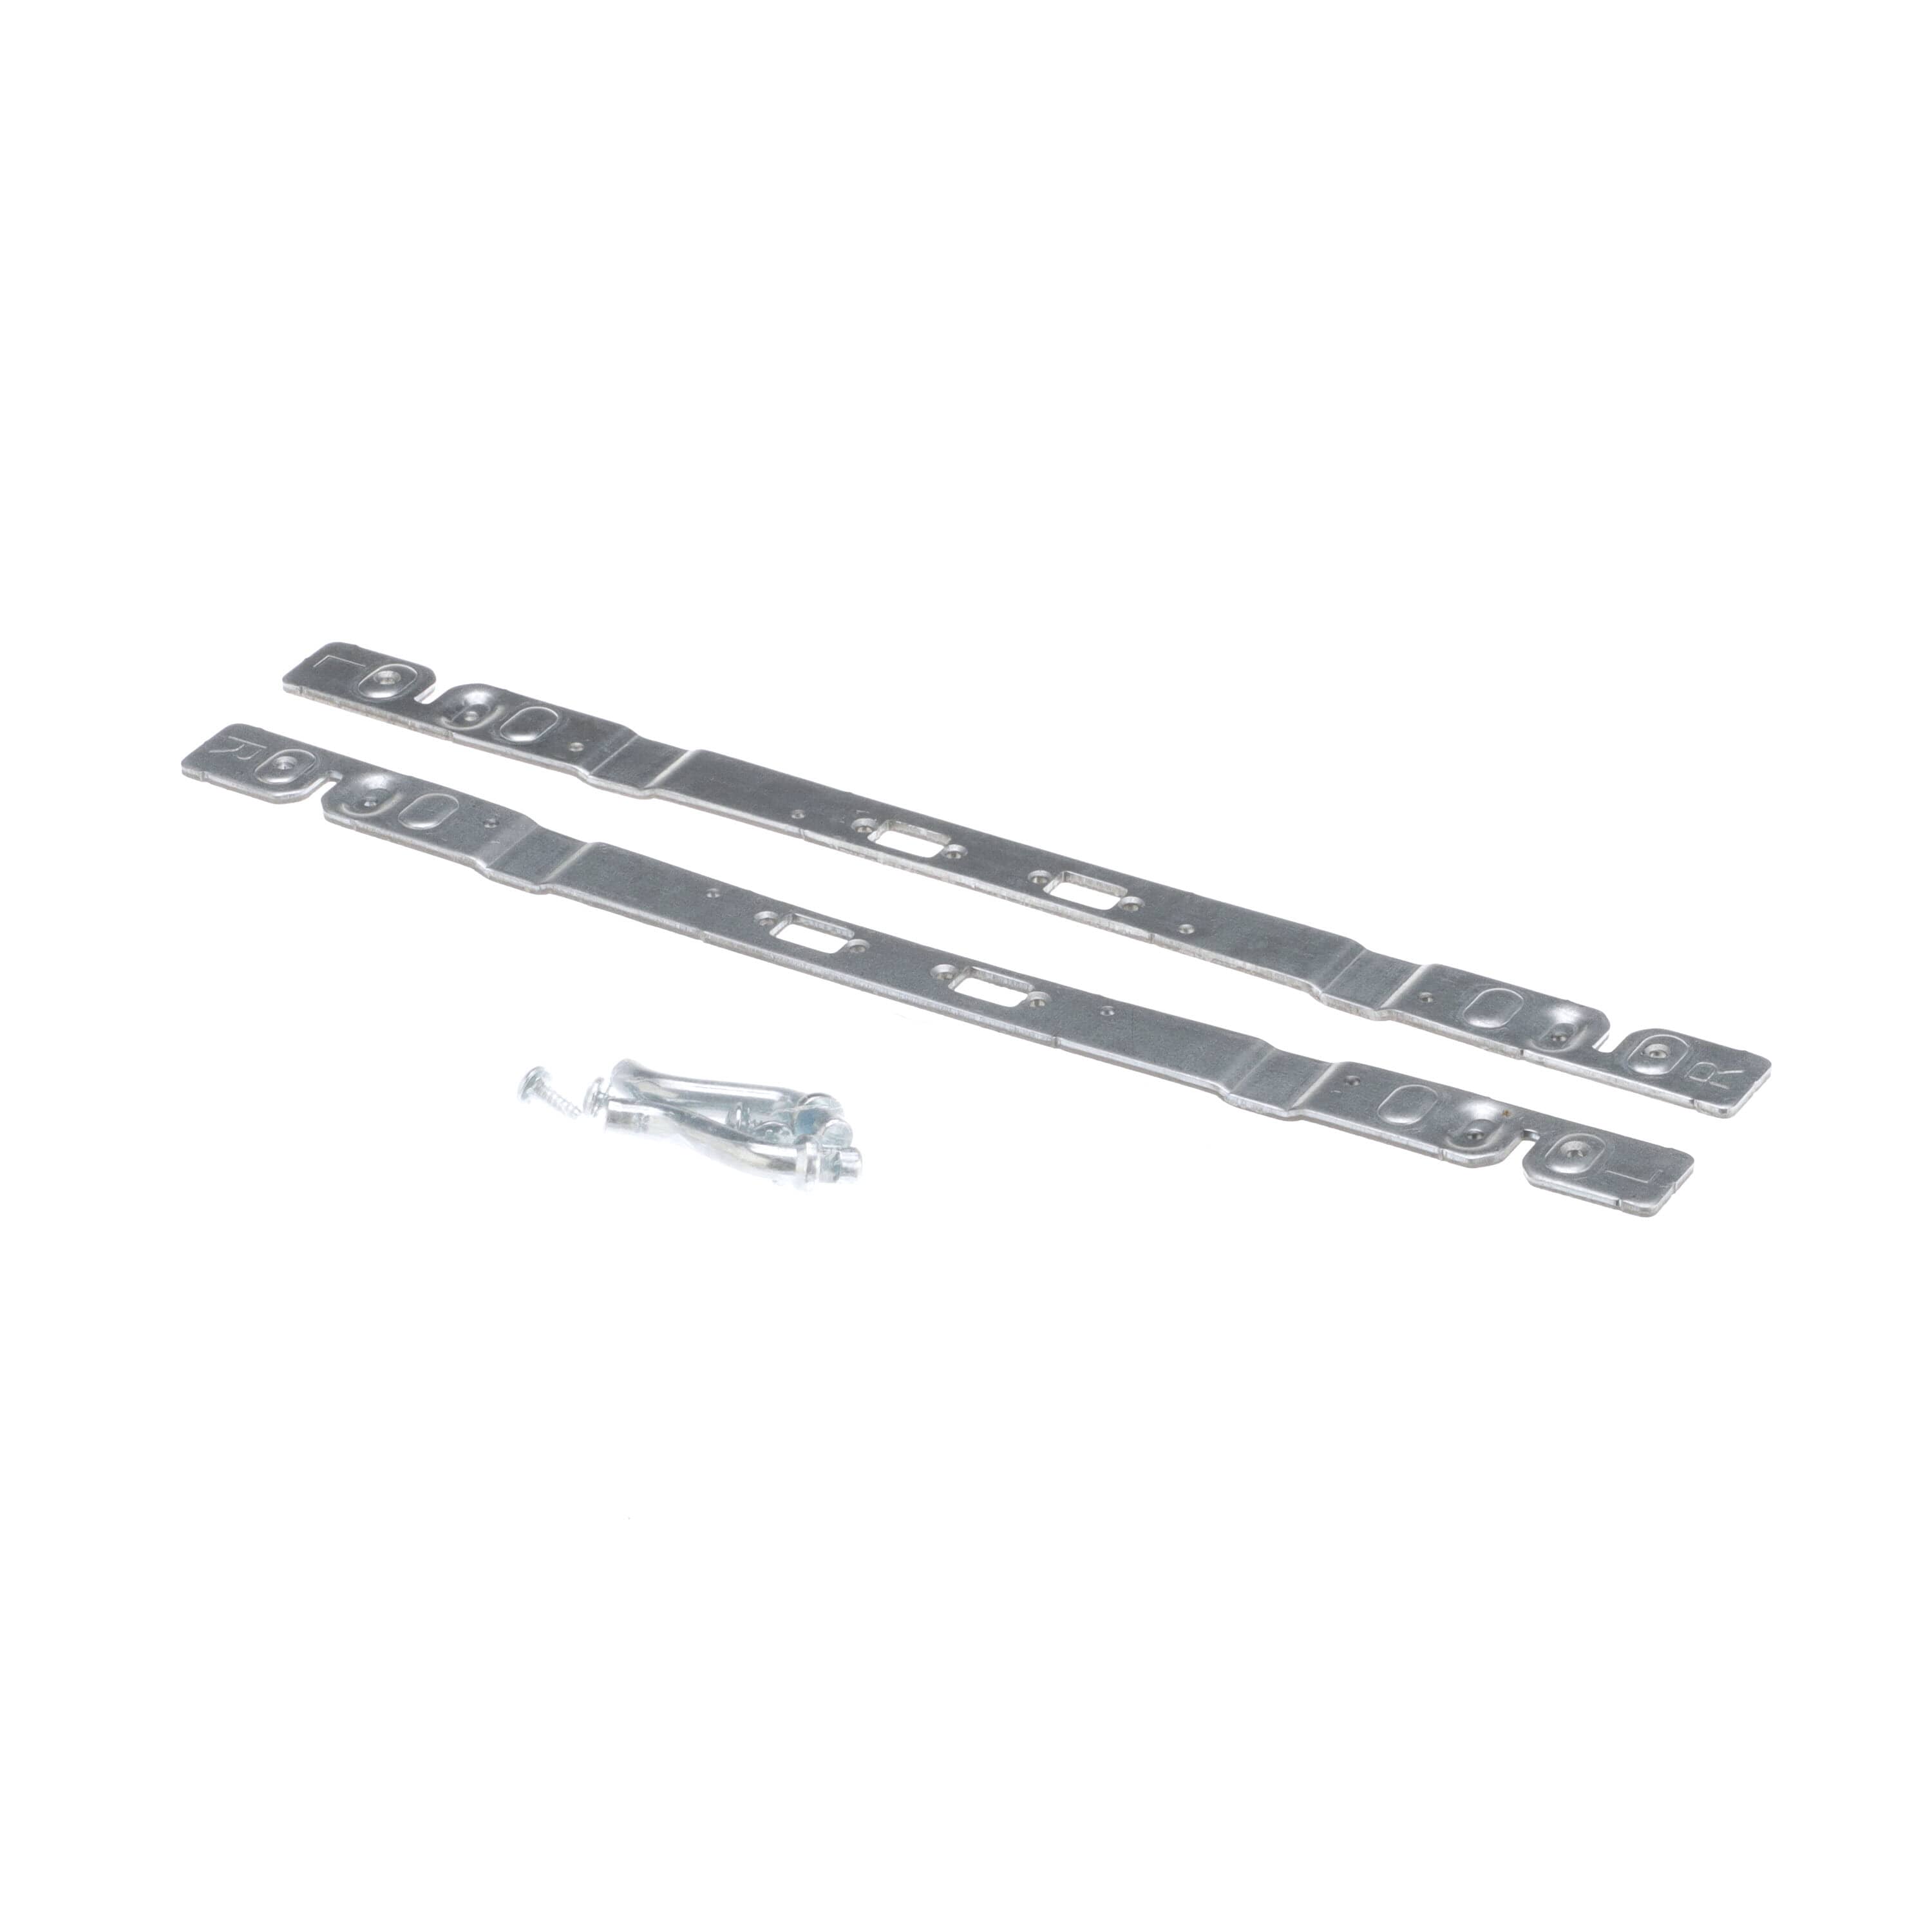 Samsung DC82-01097W REPAIR KIT ASSEMBLY